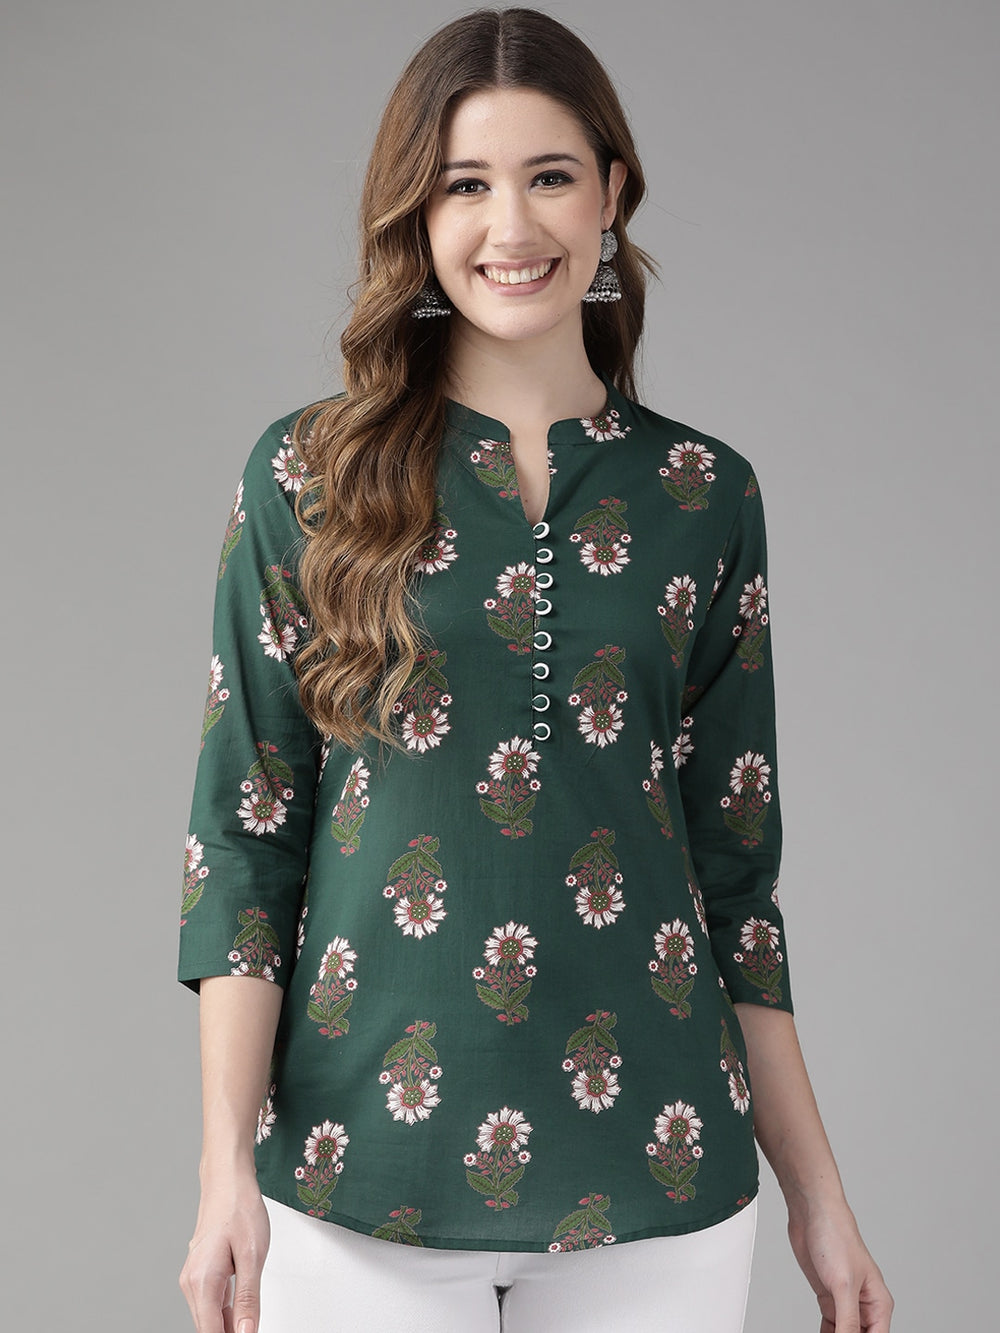 Green Floral Printed Top Yufta Store